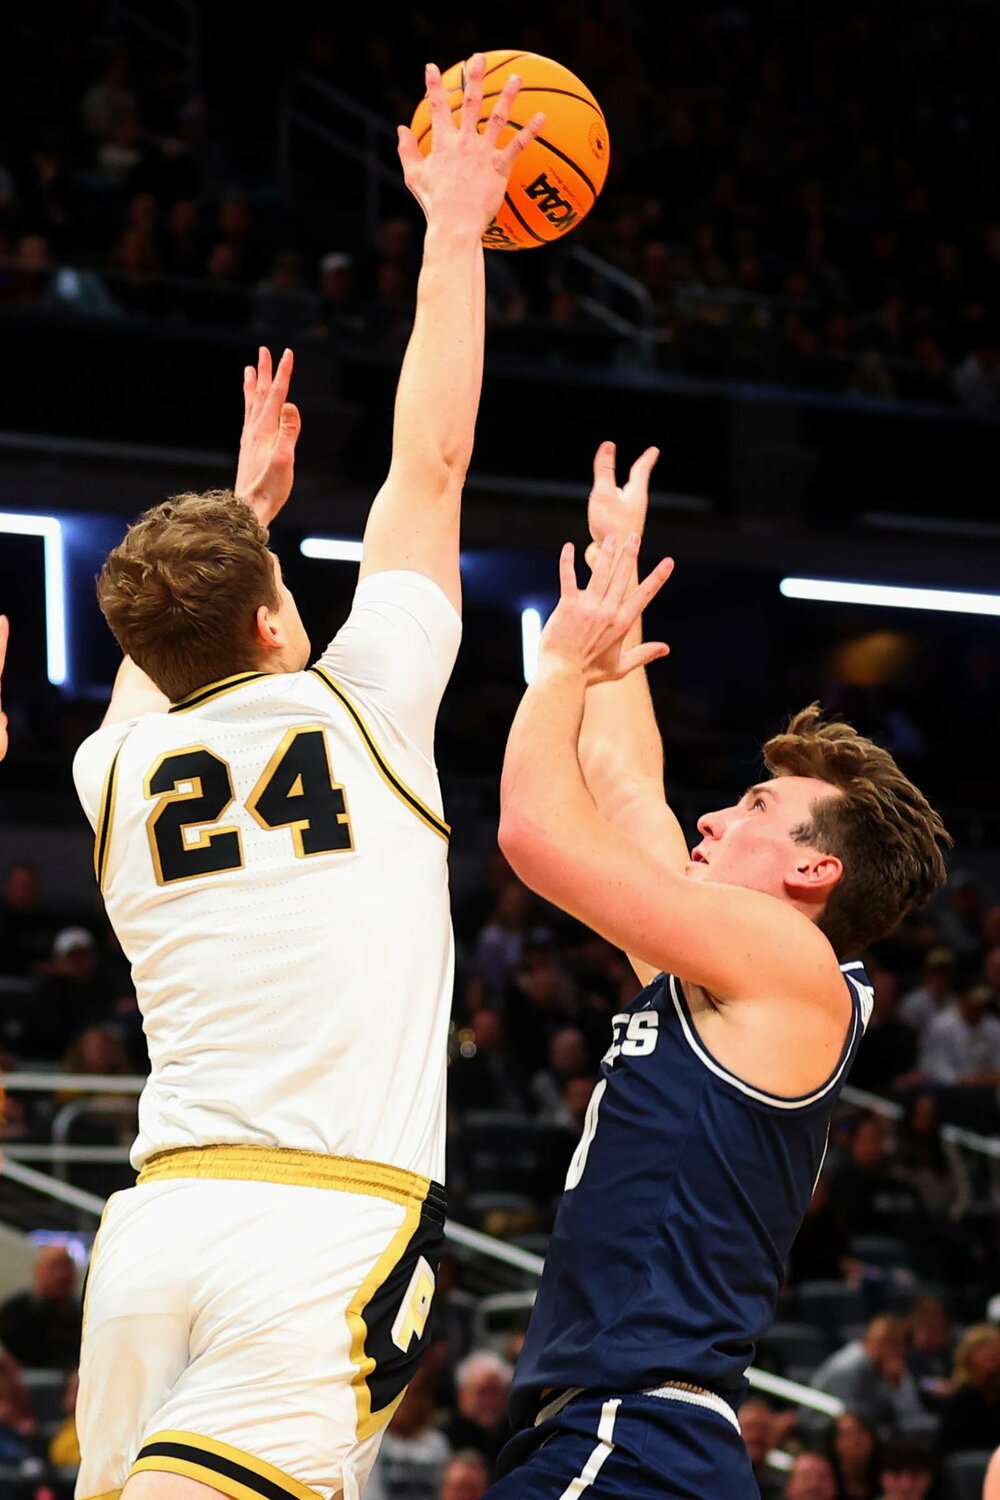 Sam King of Purdue - going for a block on Landon Brenchley of  Utah State.